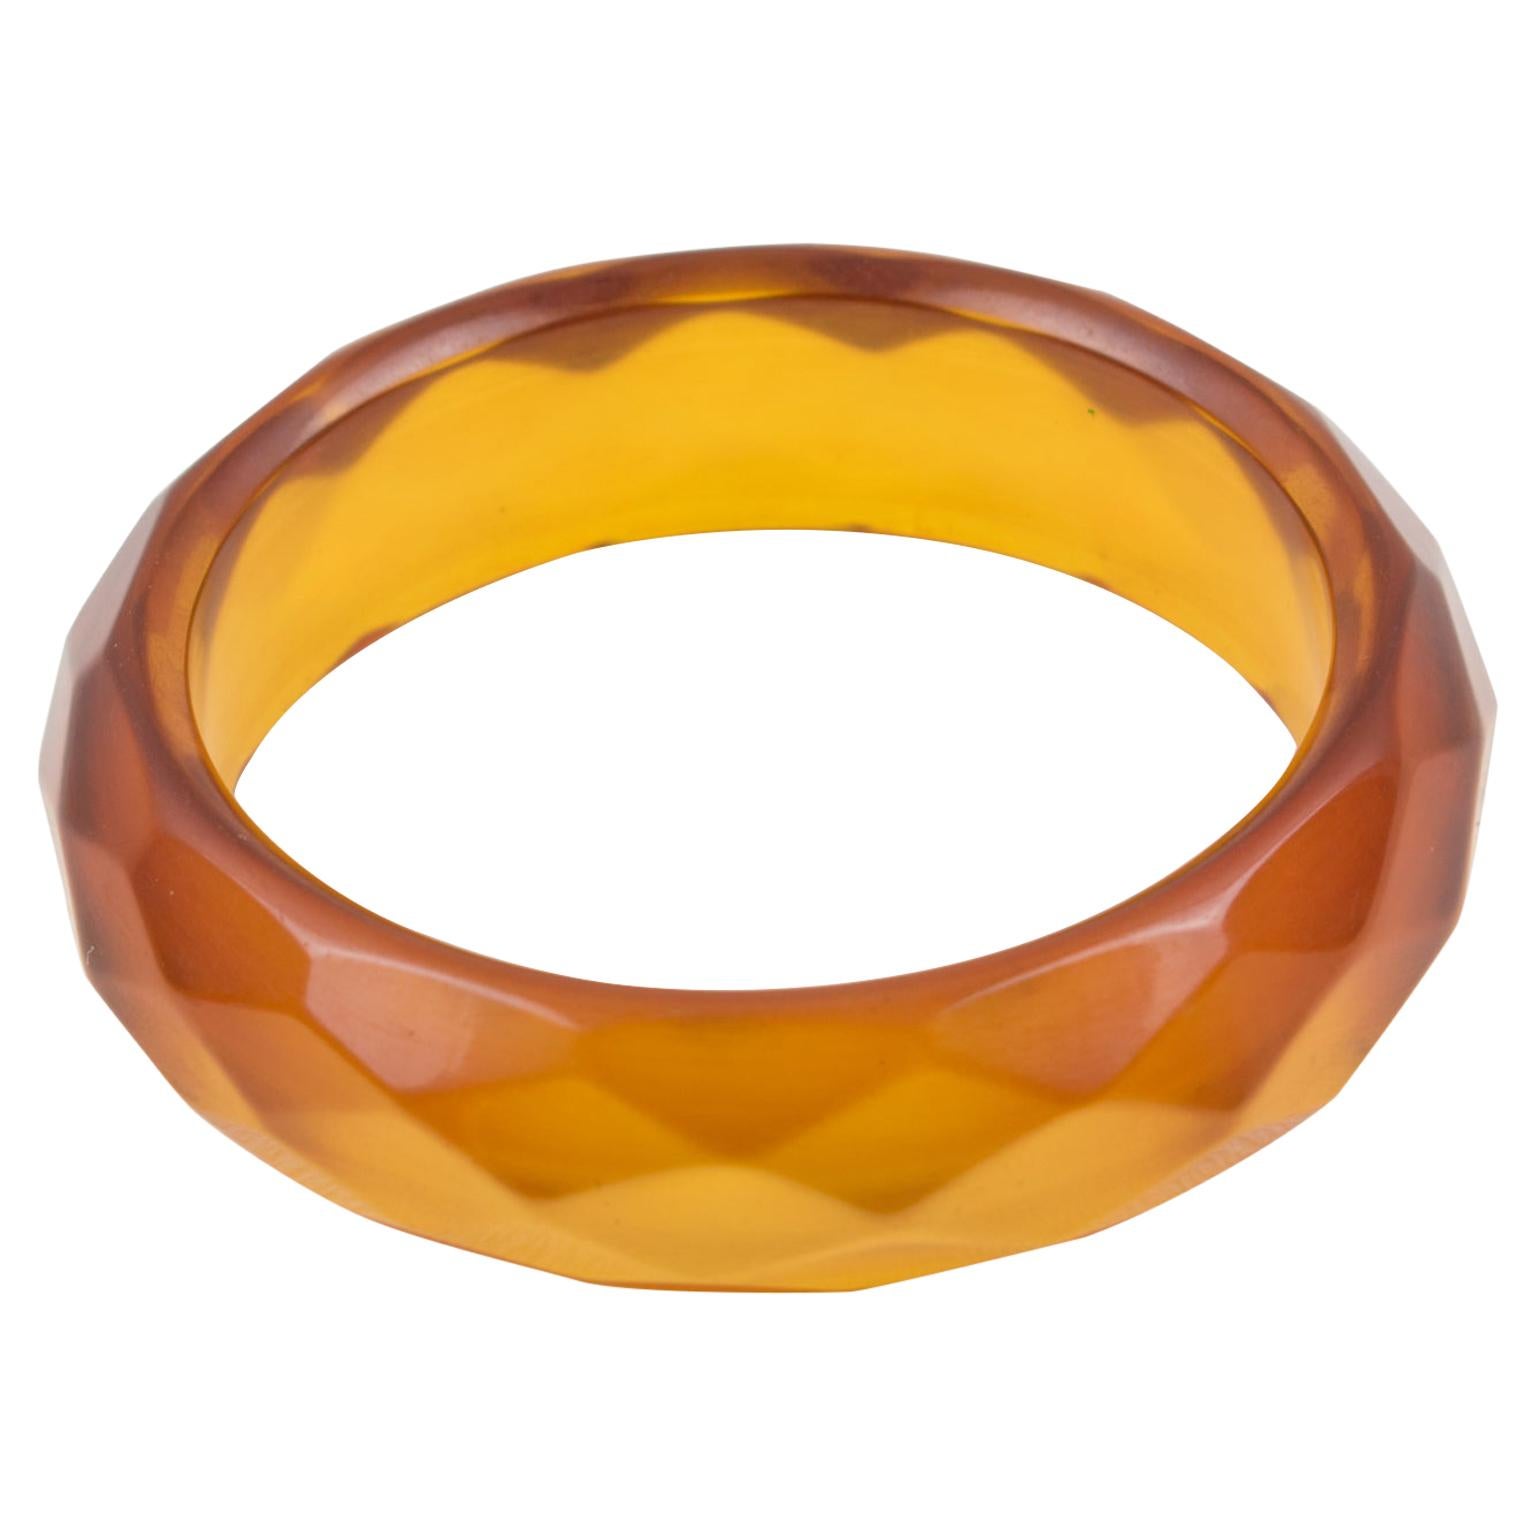 Lovely transparent orangeade Bakelite bracelet bangle. Chunky domed shape with deeply faceted and carved design all around. Intense orangeade tone, all transparent orange color with red overtone on edges. This Prystal quality piece has all the